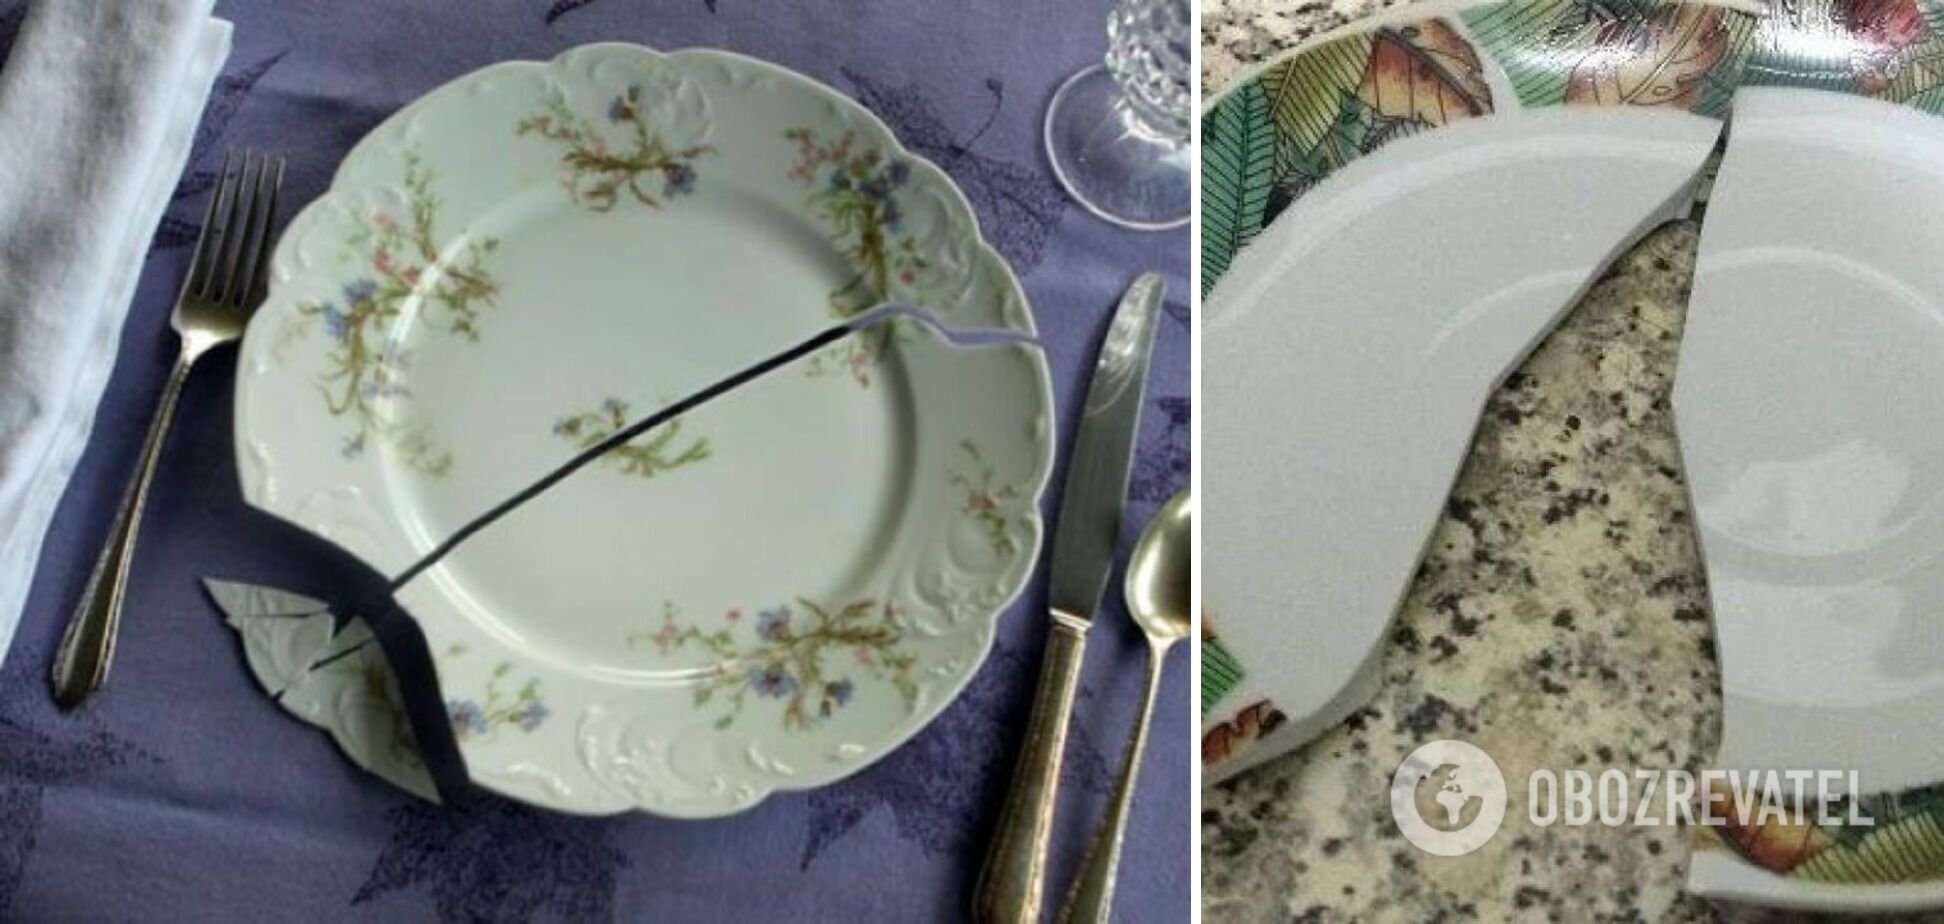 Why you shouldn't eat from cracked dishes: the essence of grandma's superstition